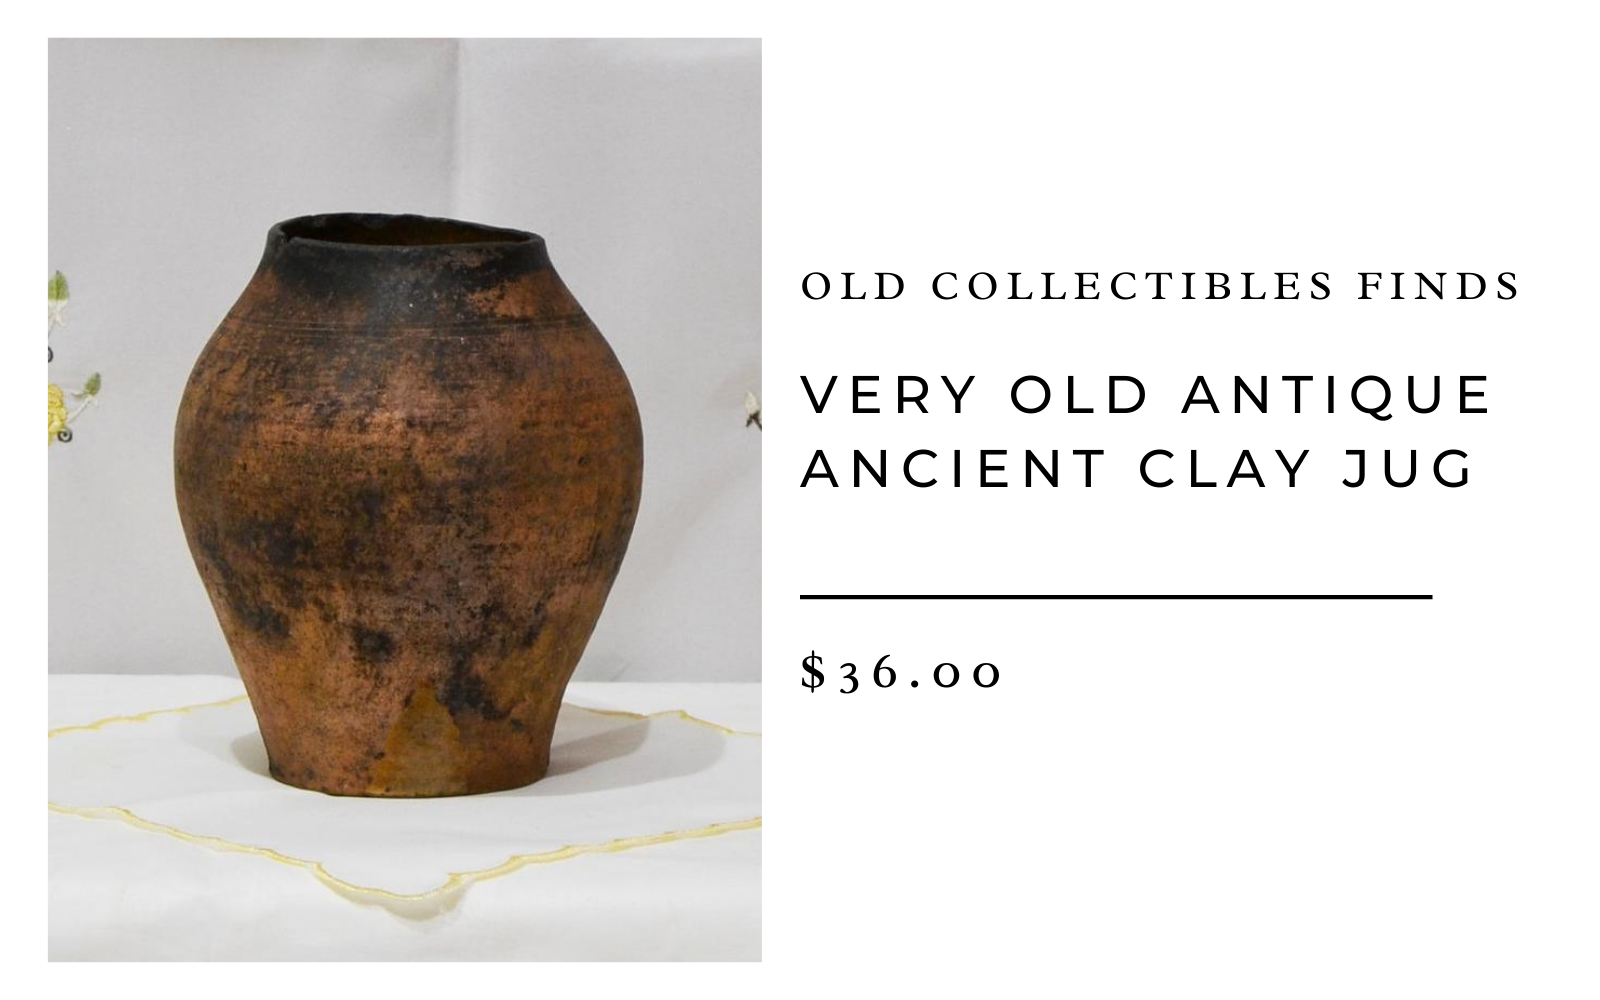 Old Collectibles Finds Very Old Antique Ancient Clay Jug